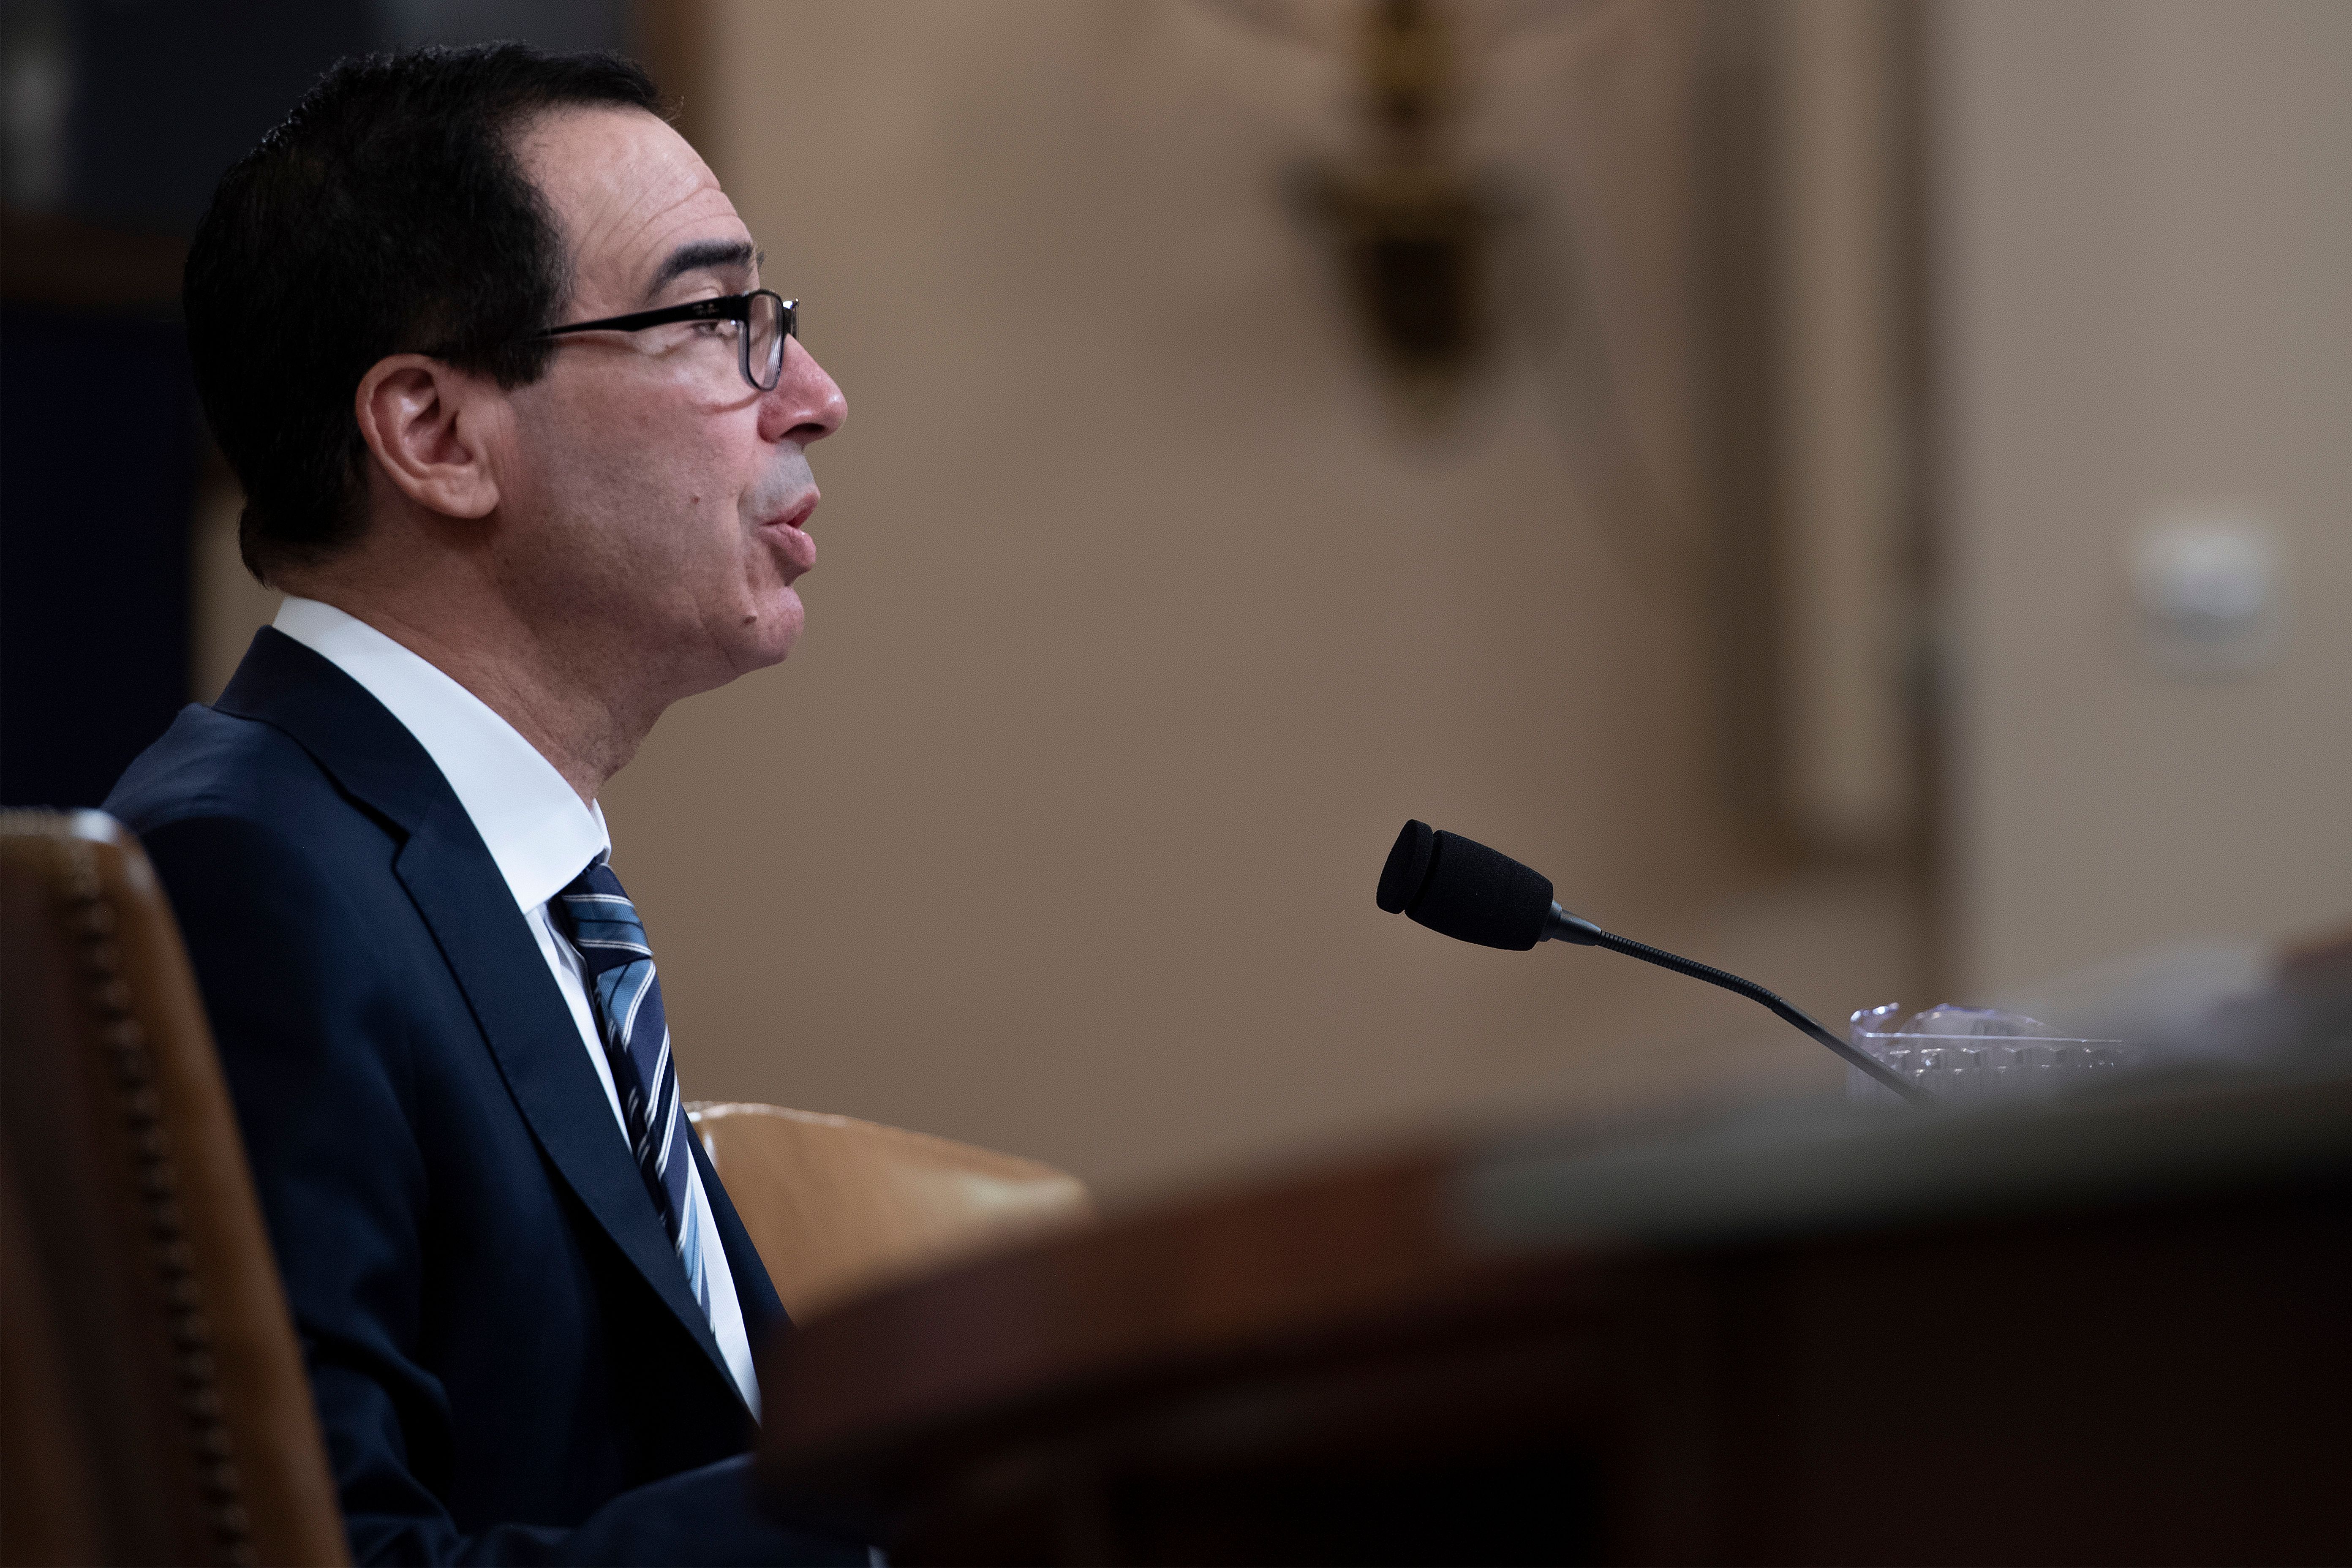 US Treasury Secretary Steven Mnuchin testifies on "The President's FY2020 Budget Proposal" before the House Ways and Means Committee on Capitol Hill in Washington, DC, on March 14, 2019. (Photo by Jim WATSON / AFP) (Photo credit should read JIM WATSON/AFP/Getty Images)